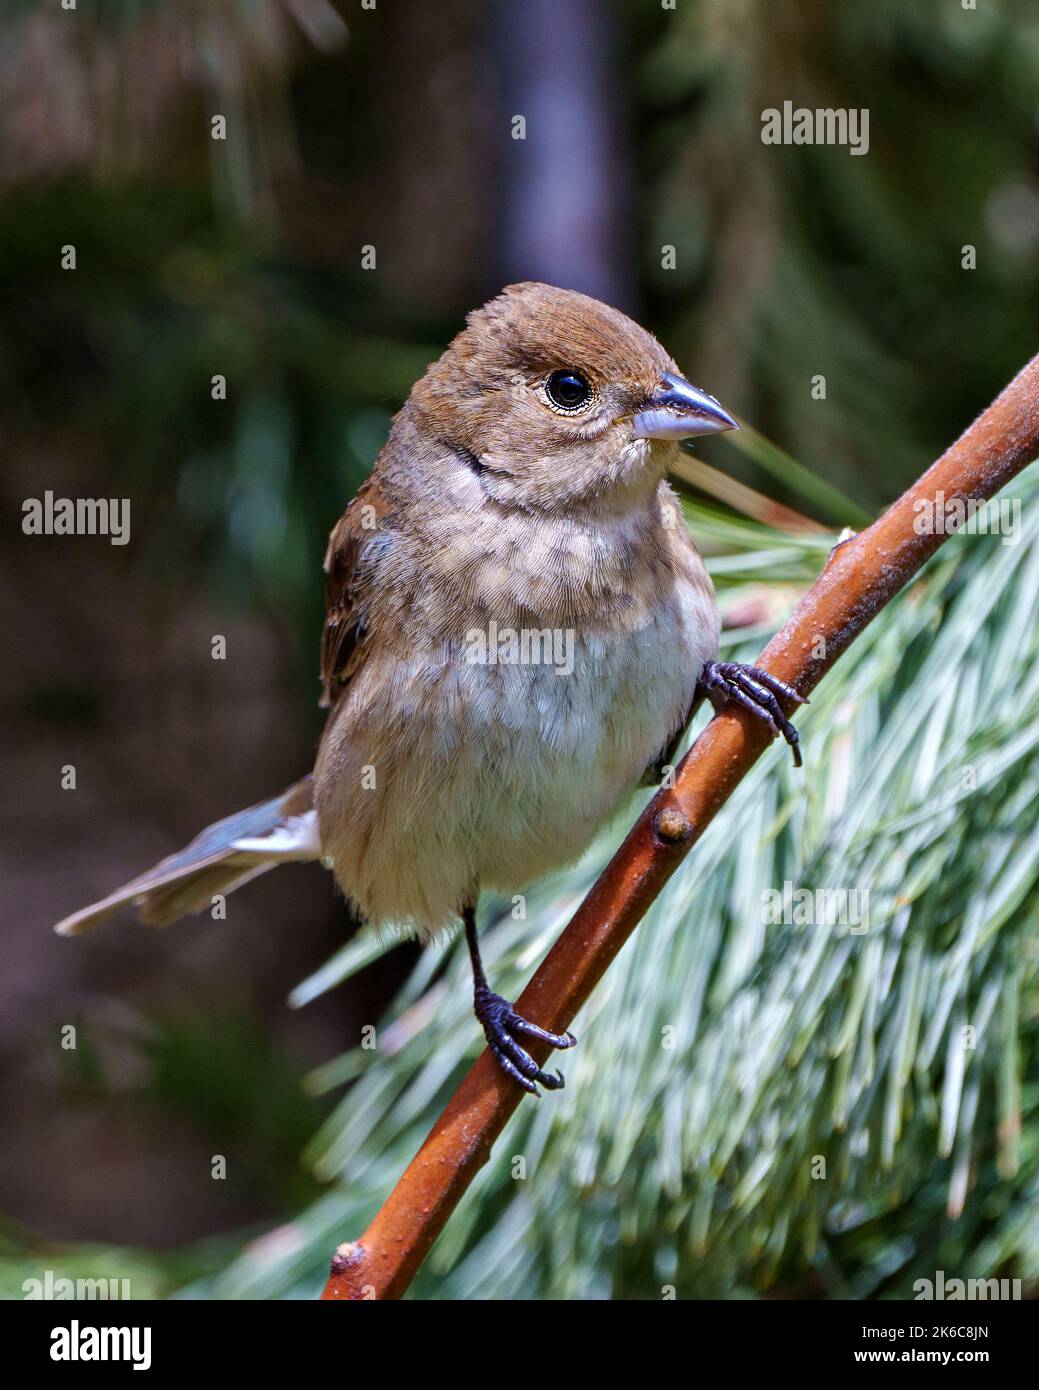 Sparrow close-up perched on a branch with a blur background in its environment and habitat surrounding. House Brown Sparrow. Coniferous trees. Stock Photo